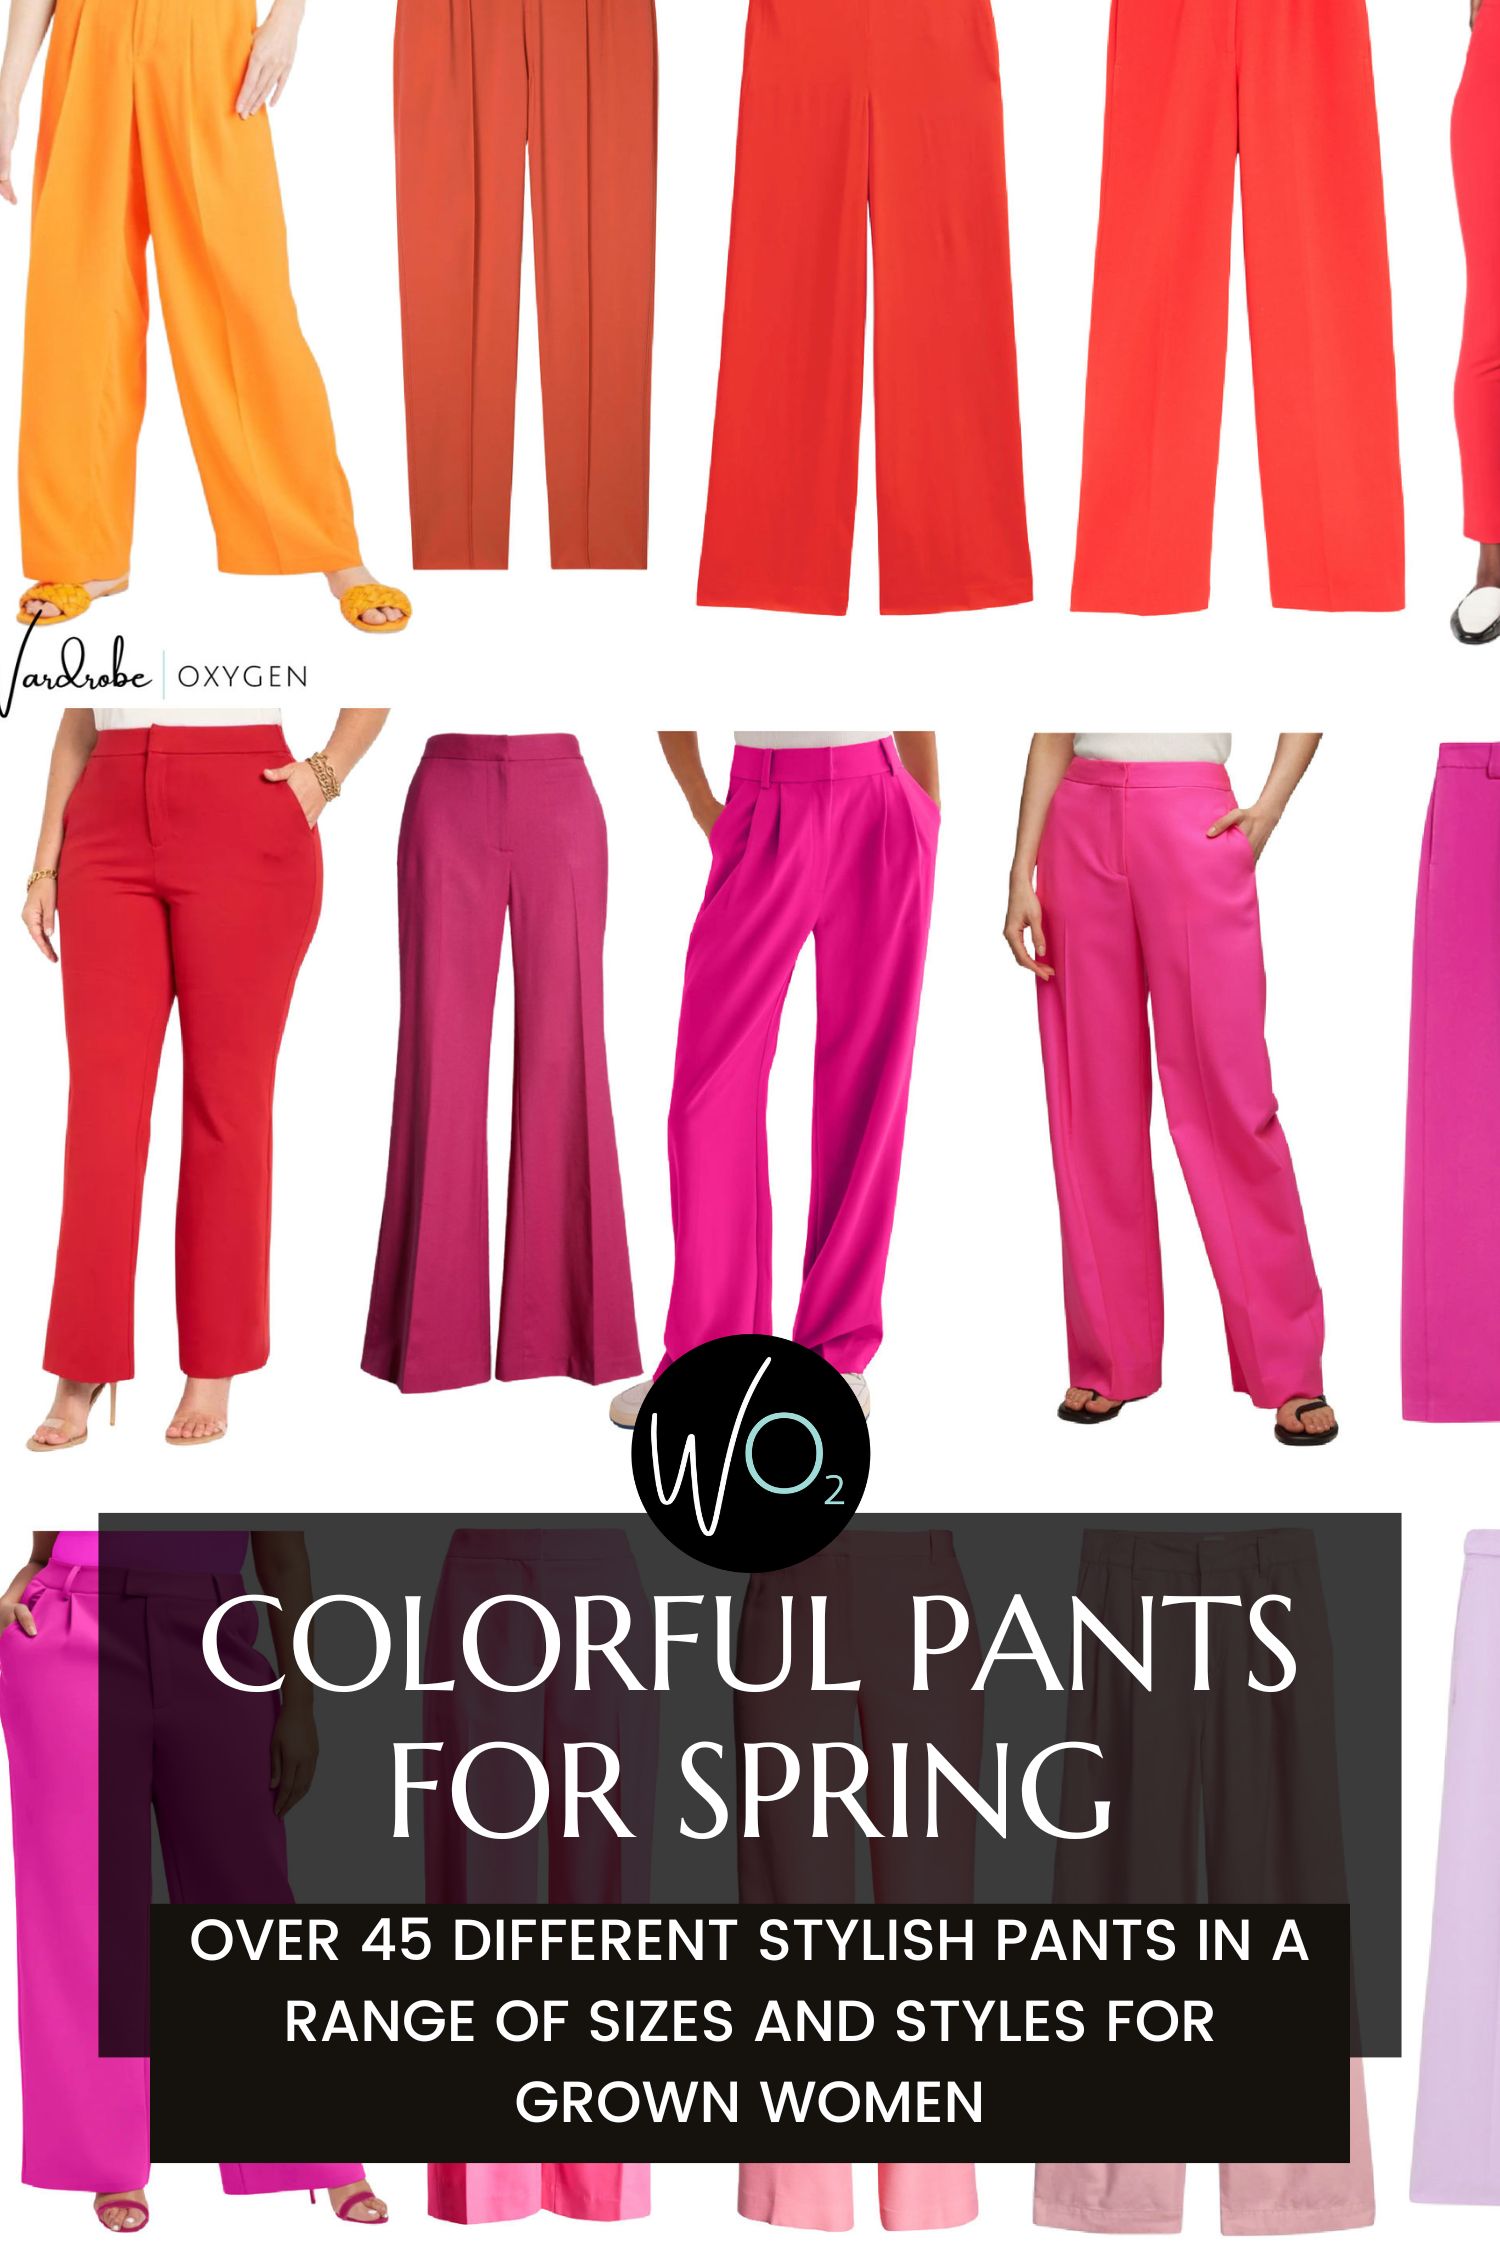 Colorful Pants for Spring for Grown Women: 45+ Stylish Options